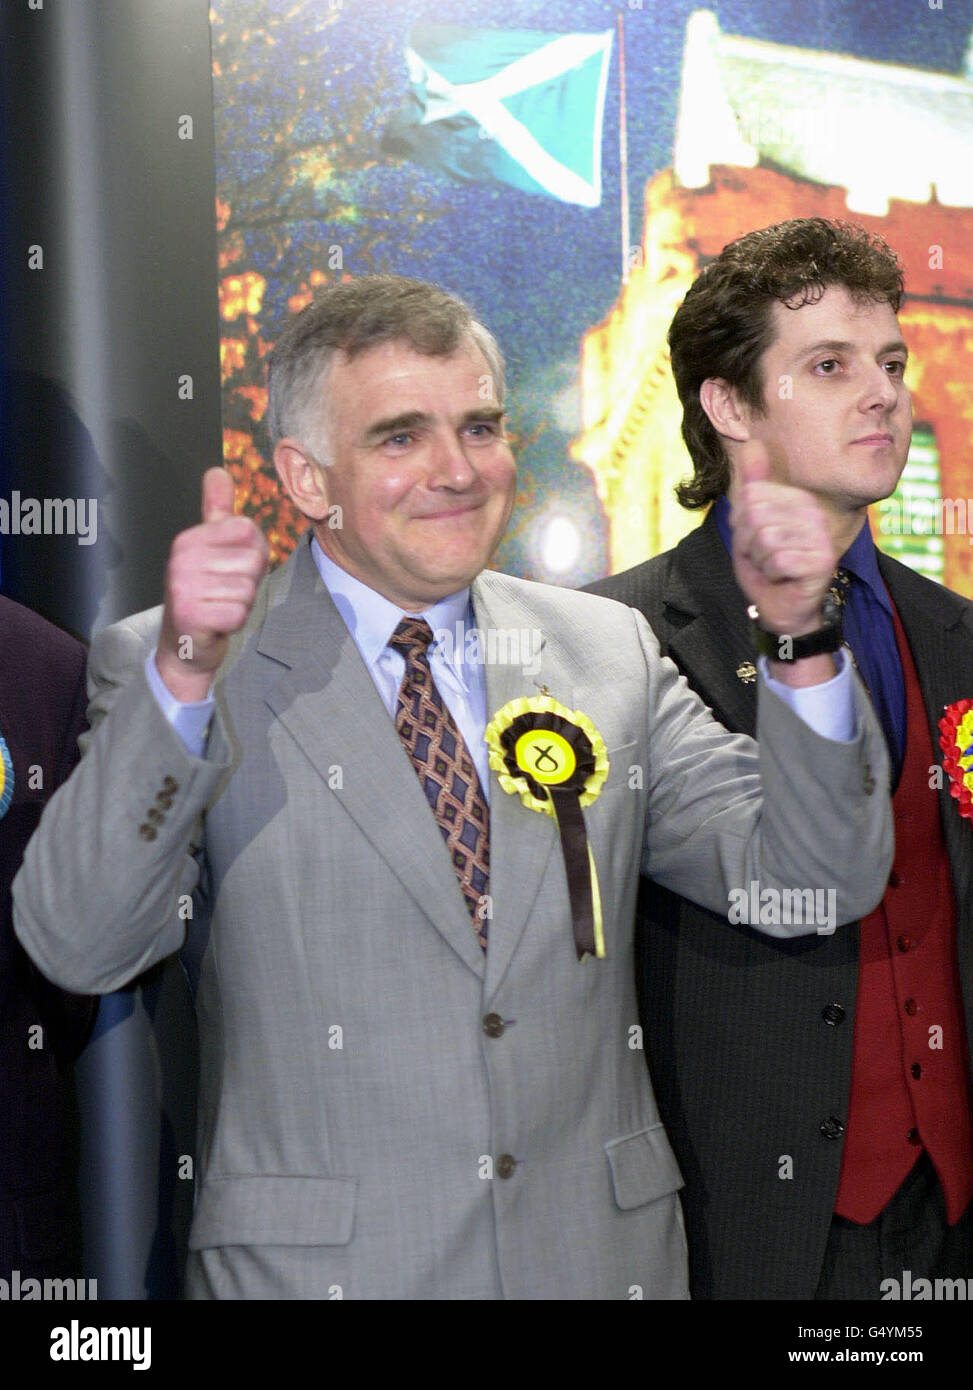 Scottish National Party candidate Jim Mather celebrates as Labour is forced into third place, and UK Independence Party candidate Alistair McConnachie (right) looks on as the result for the Ayr by-election is announced at the Citadel Leisure Centre in Ayr. Stock Photo